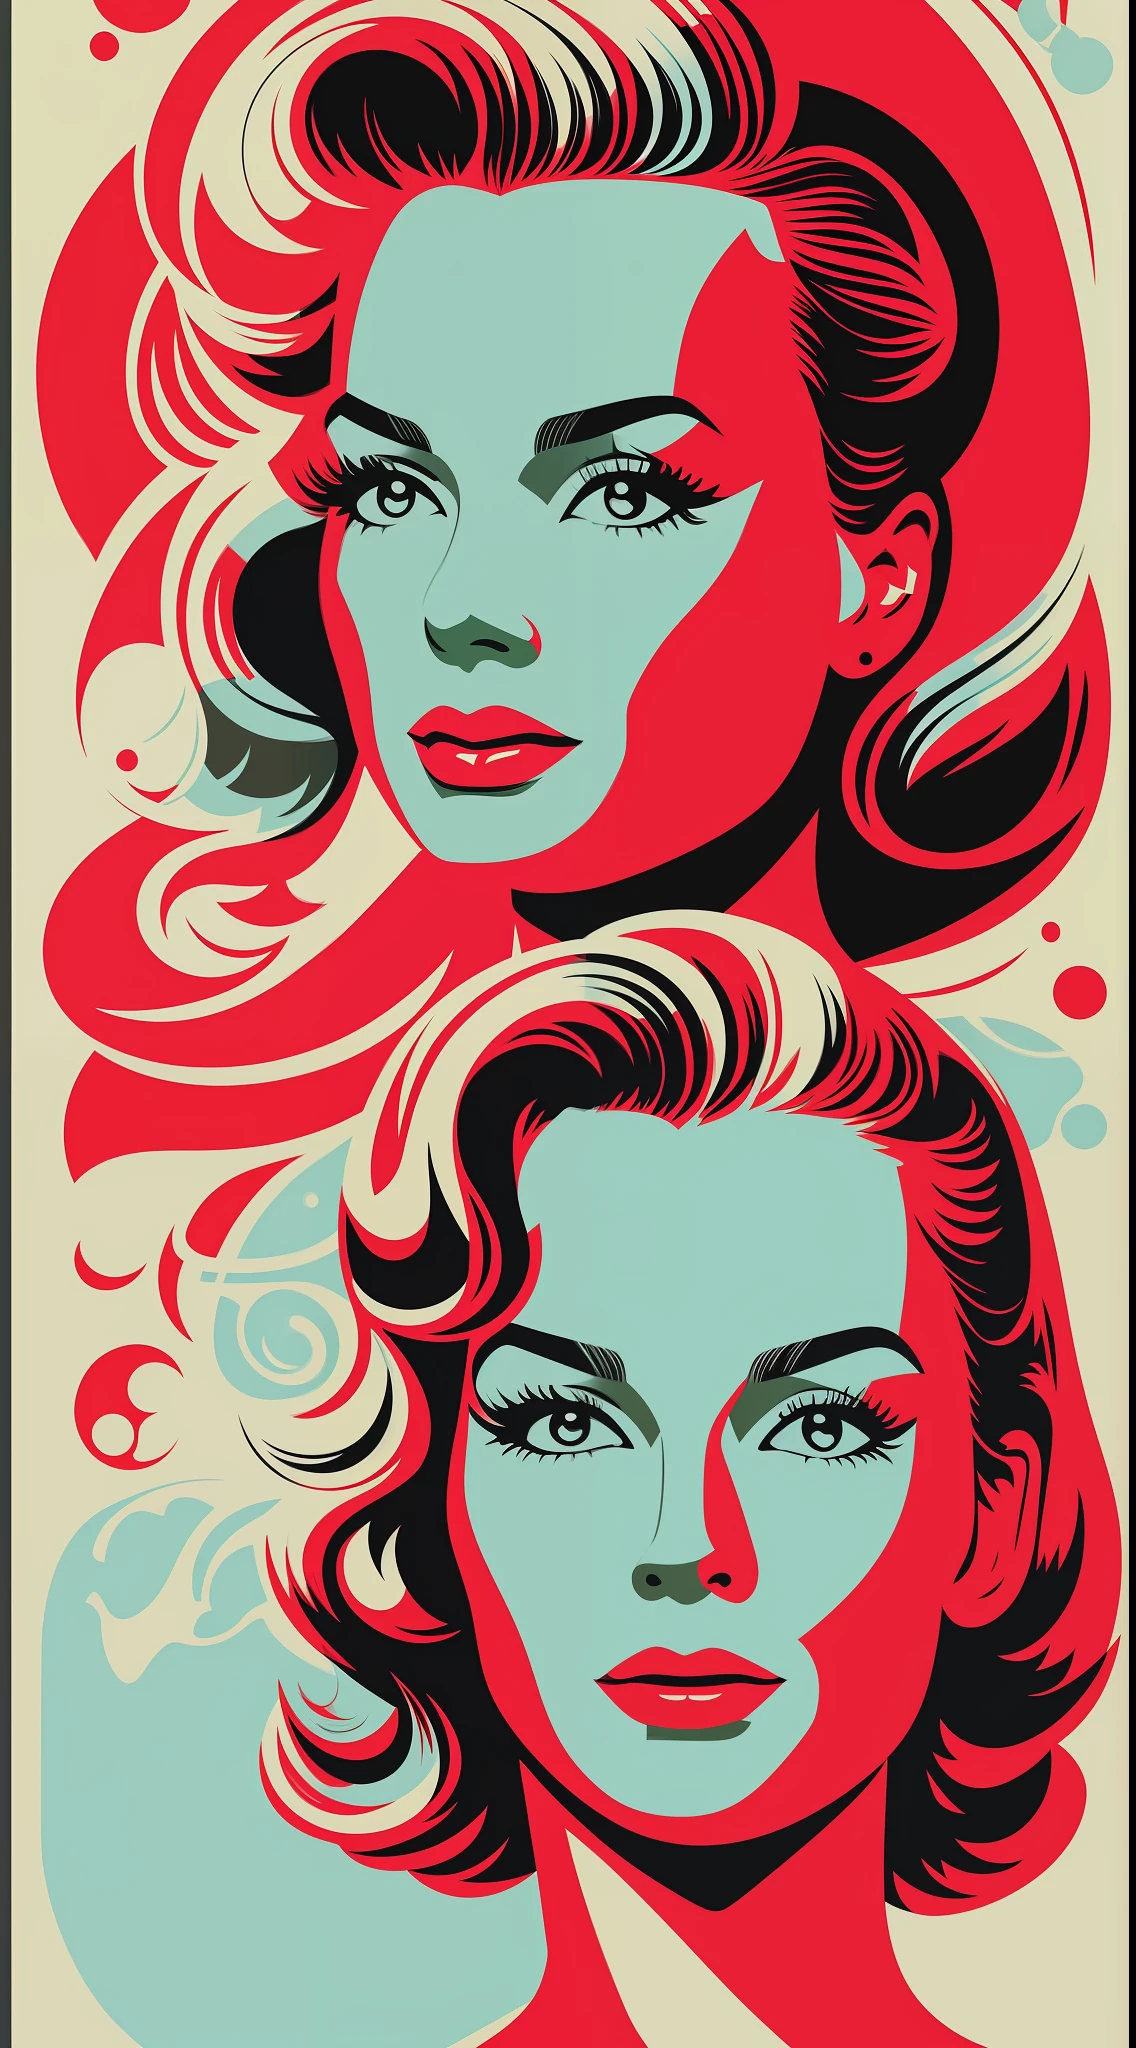 Vector for T-shirt print of a female face style 50's science fiction movies, 60s old movie style image, image with white background, highlighting the stylized image of space films from the 50s and its look